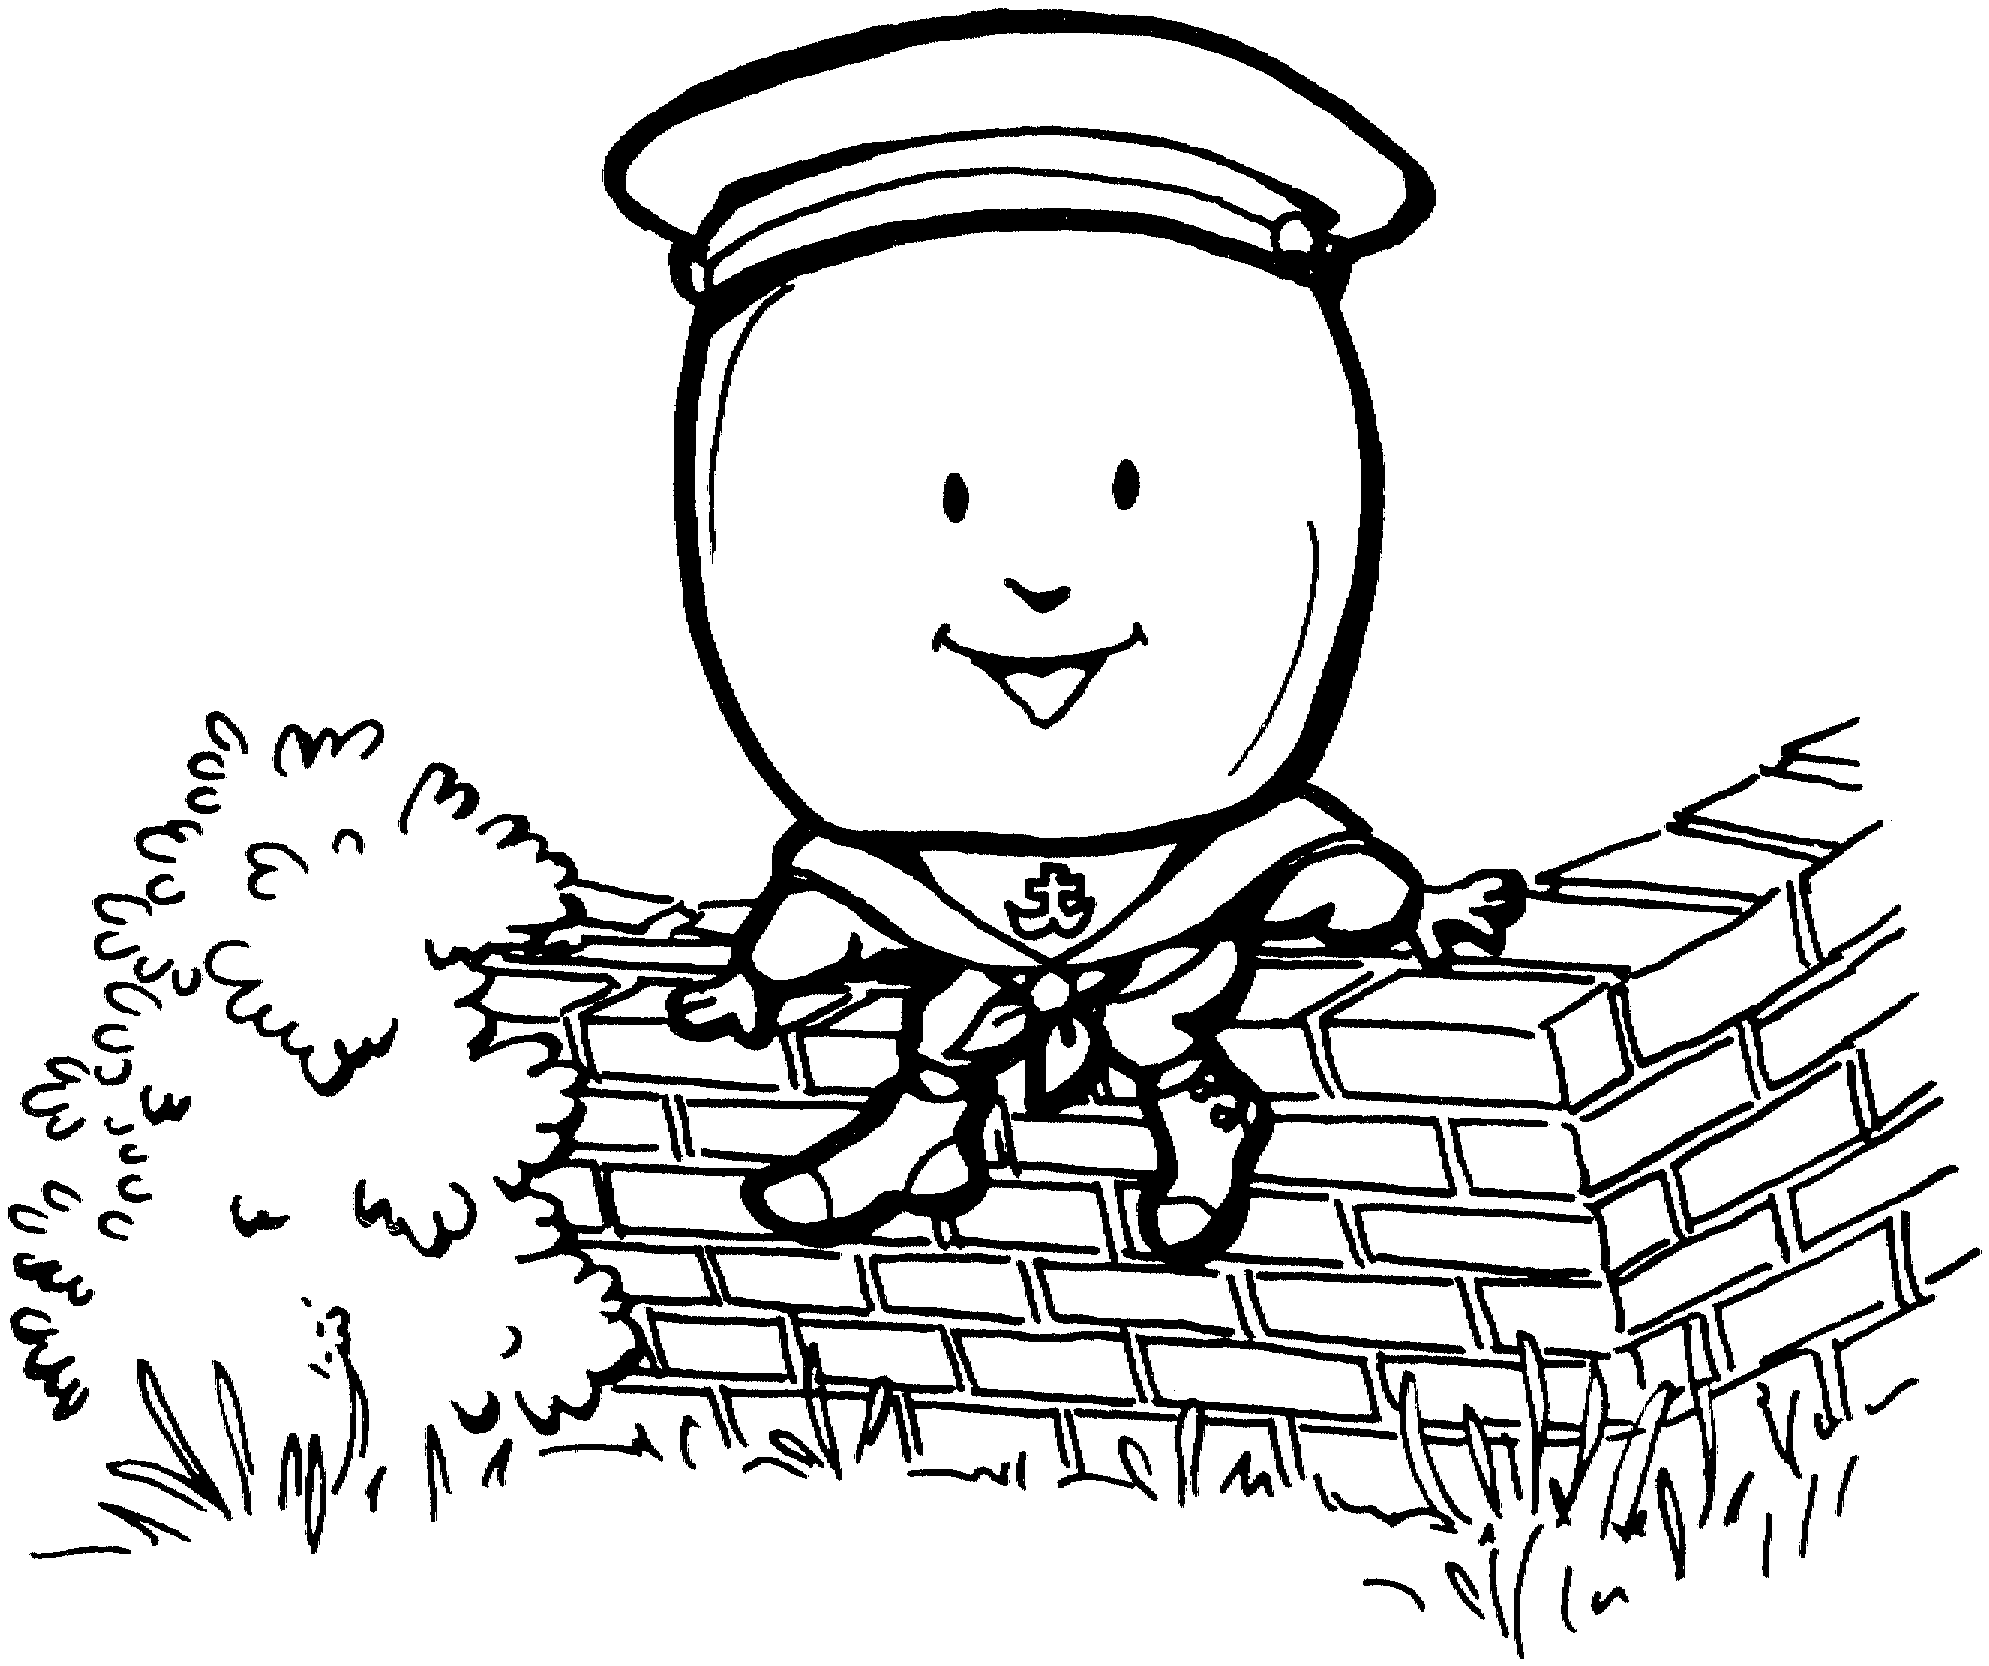 Humpty Dumpty Coloring Page - Coloring Pages for Kids and for Adults